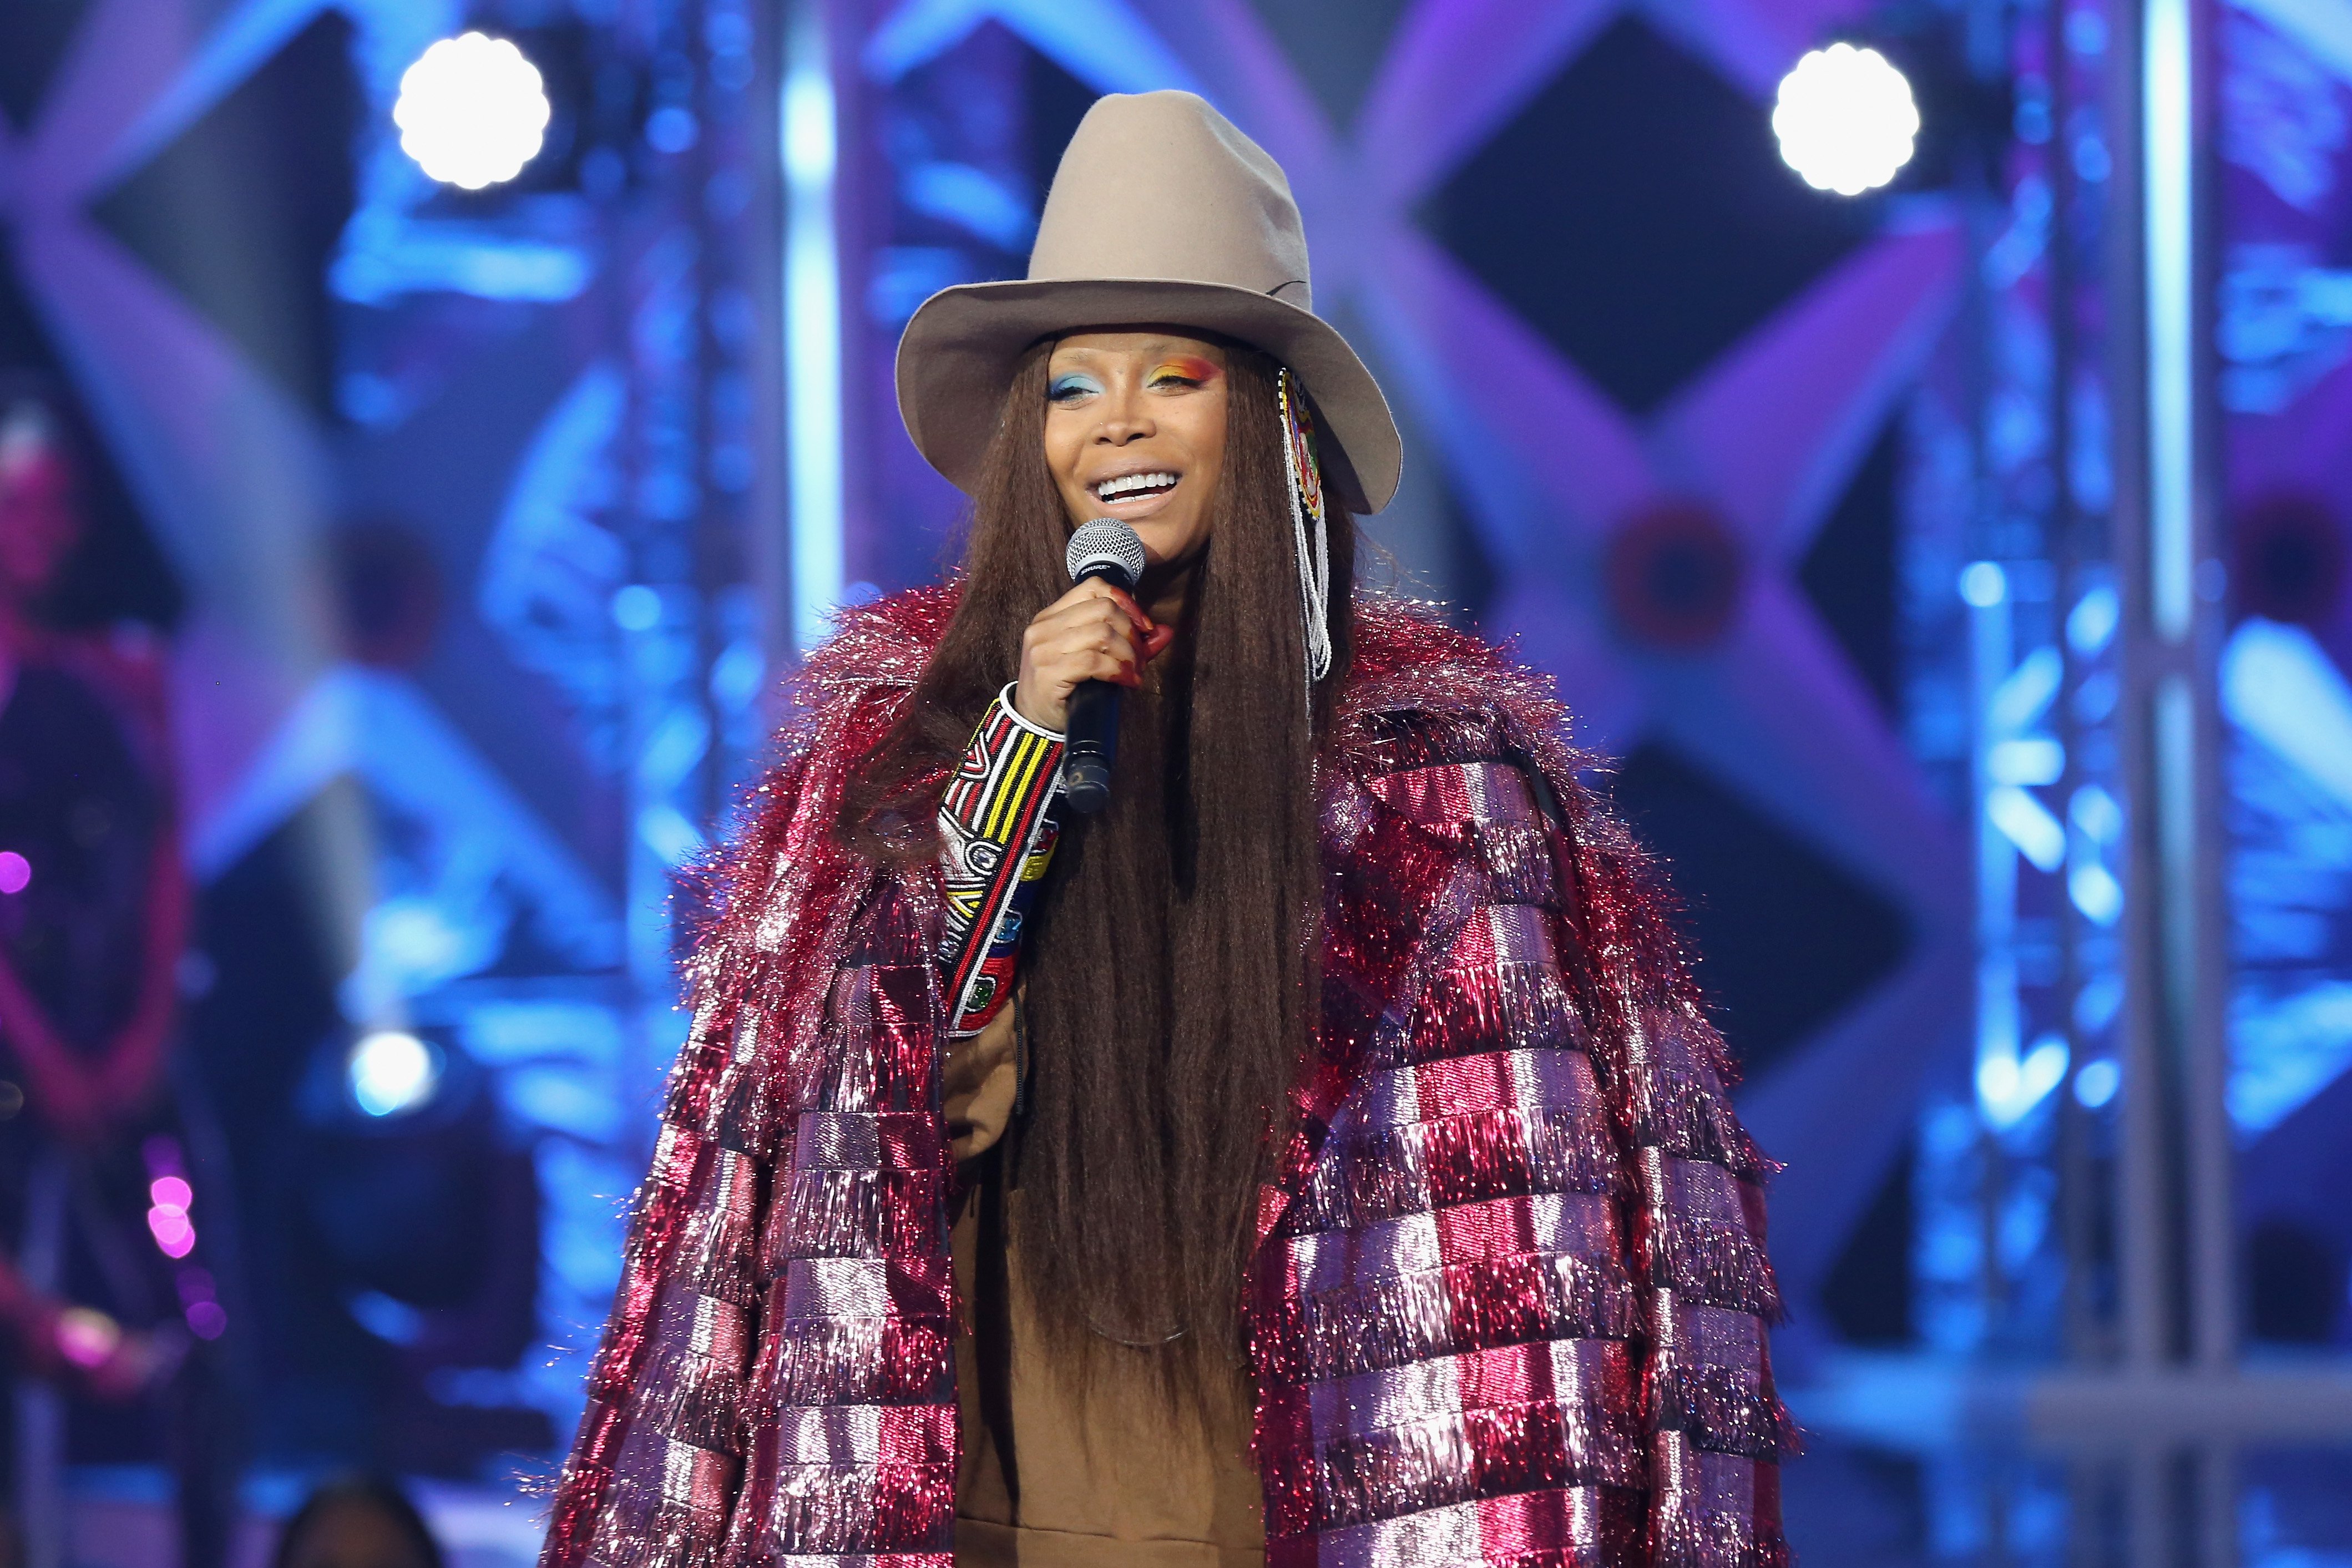 Singer Erykah Badu attends the BET's Social Awards 2018 on February 11, 2018 in Atlanta, Georgia | Photo: Getty Images